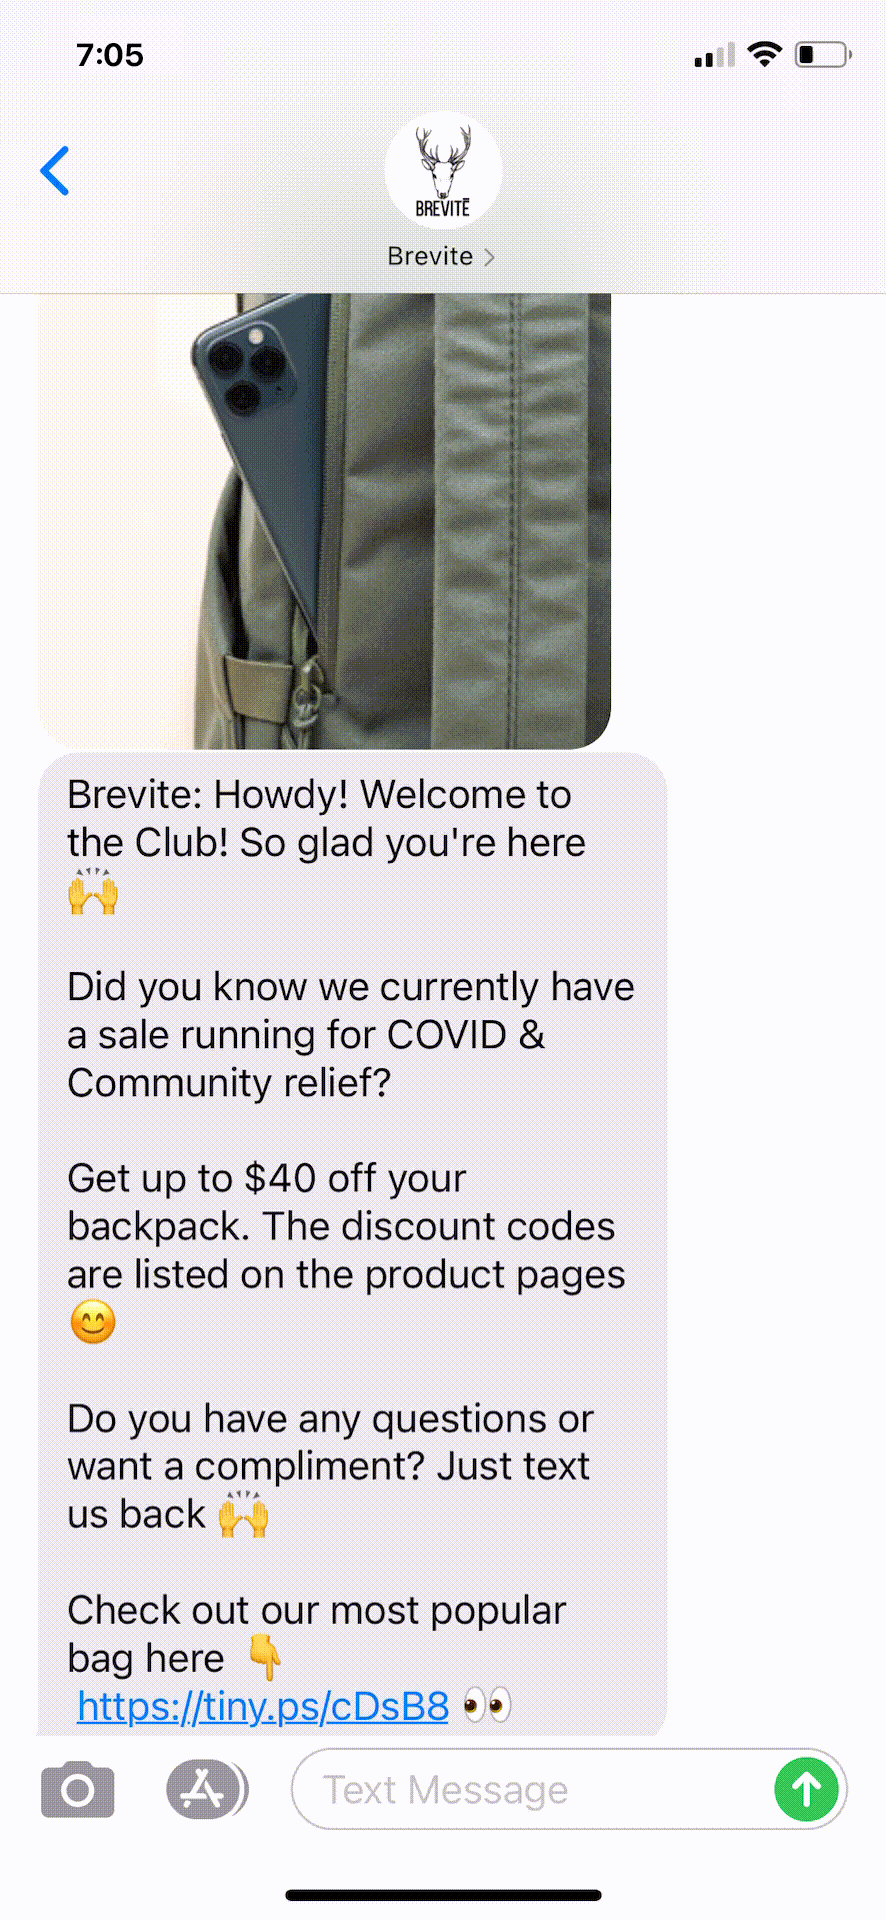 Brevite-1-Text-Message-Marketing-Example-07.28.2020-